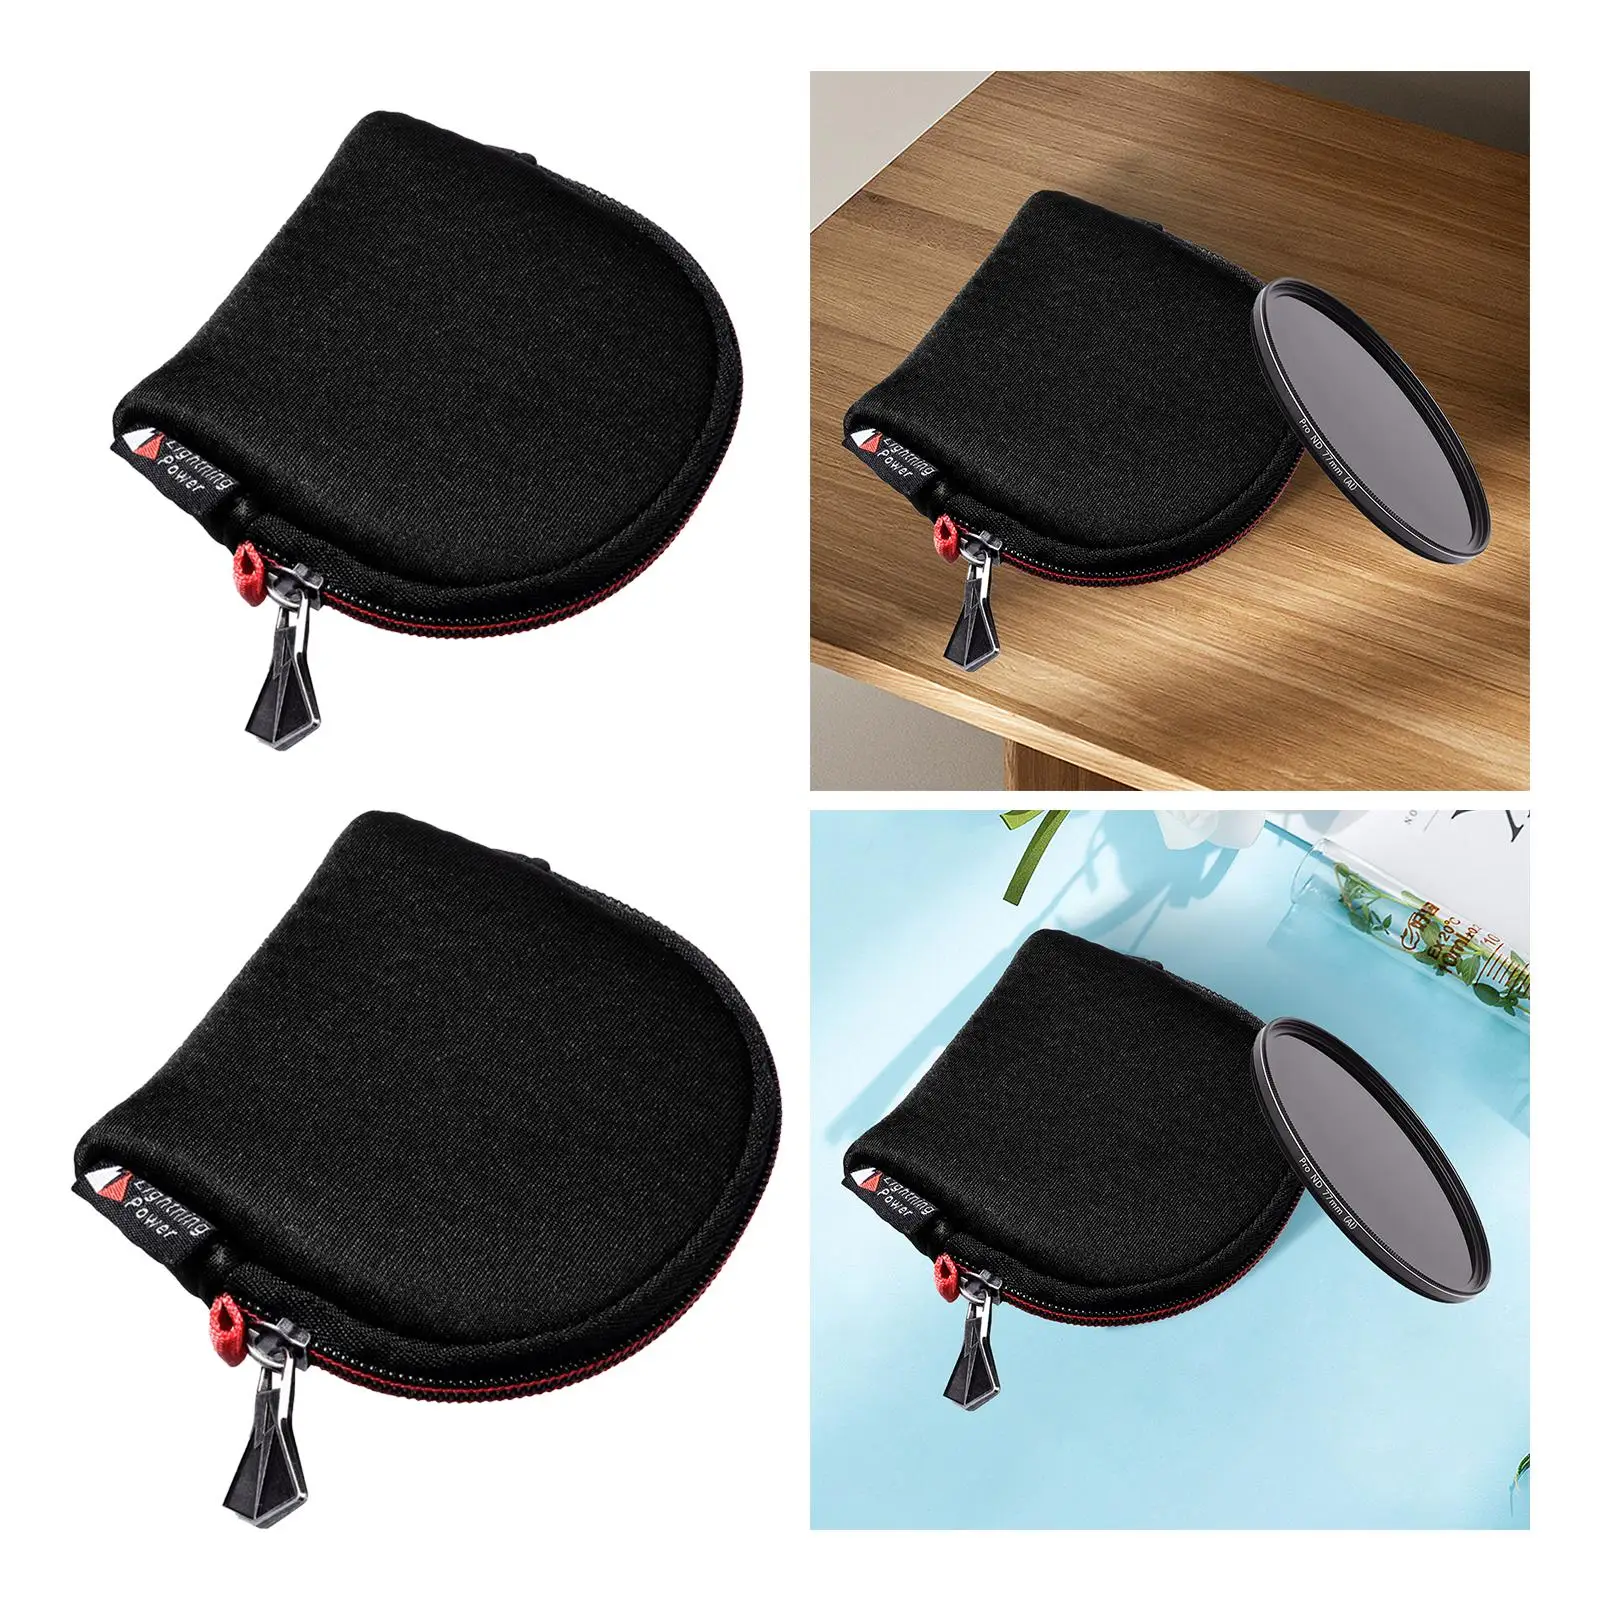 Lens Filter Bag Professional Universal Travel Case Outdoor with Compartment Attachment Filter Carrying Case Camera Lens Filter